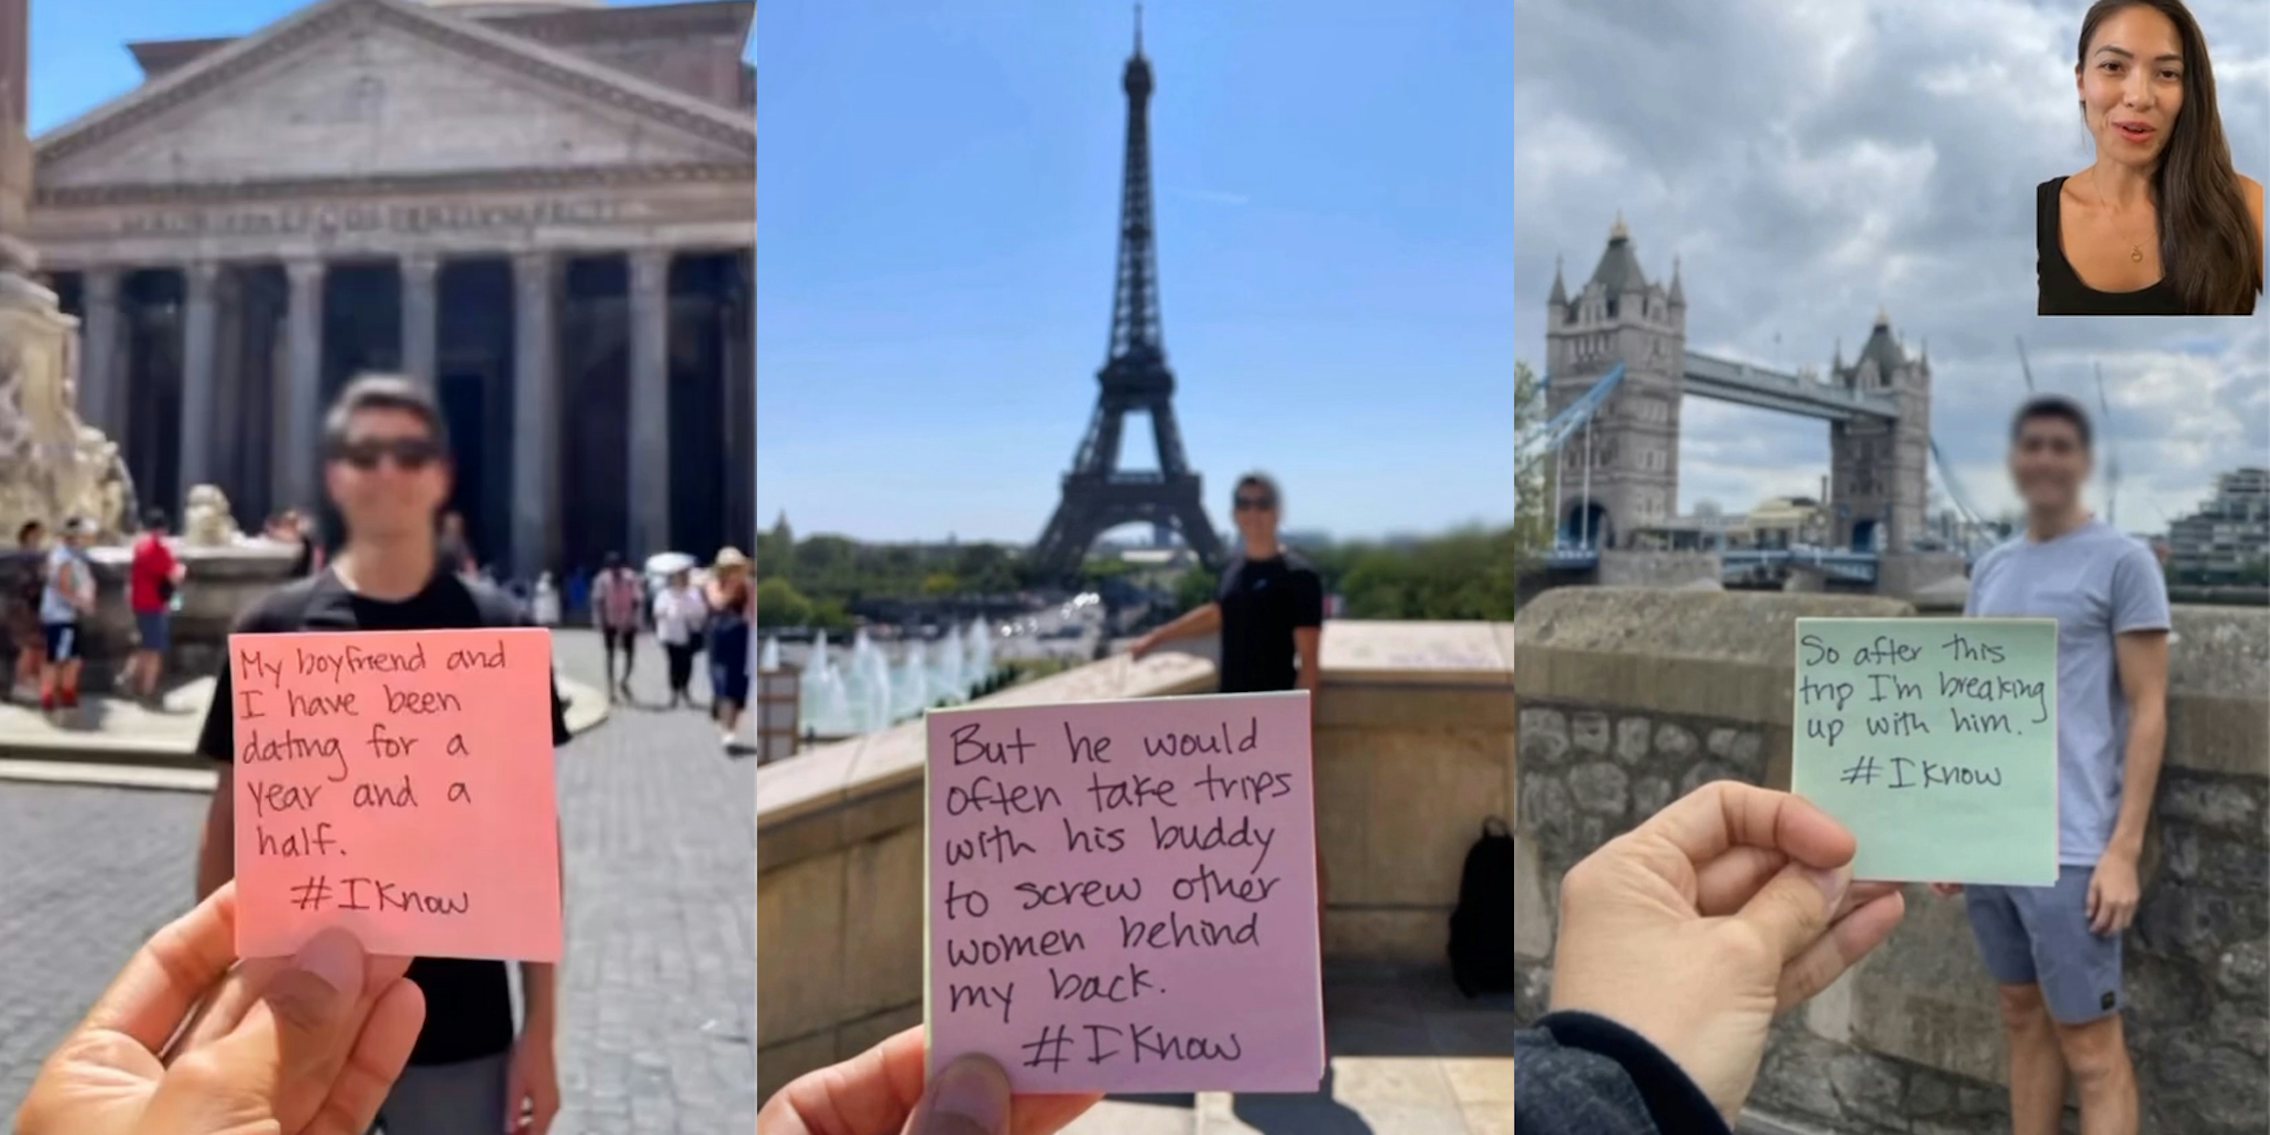 woman holding note in front of bf on vacation with message 'My boyfriend and I have been dating for a year and a half. #IKnow (l) woman holding note in front of bf on vacation with message 'But he would often take trips with his buddy to screw other women behind my back. #IKnow' (c) woman holding note in front of bf on vacation with message 'So after this trip I'm breaking up with him. #IKnow' (r)